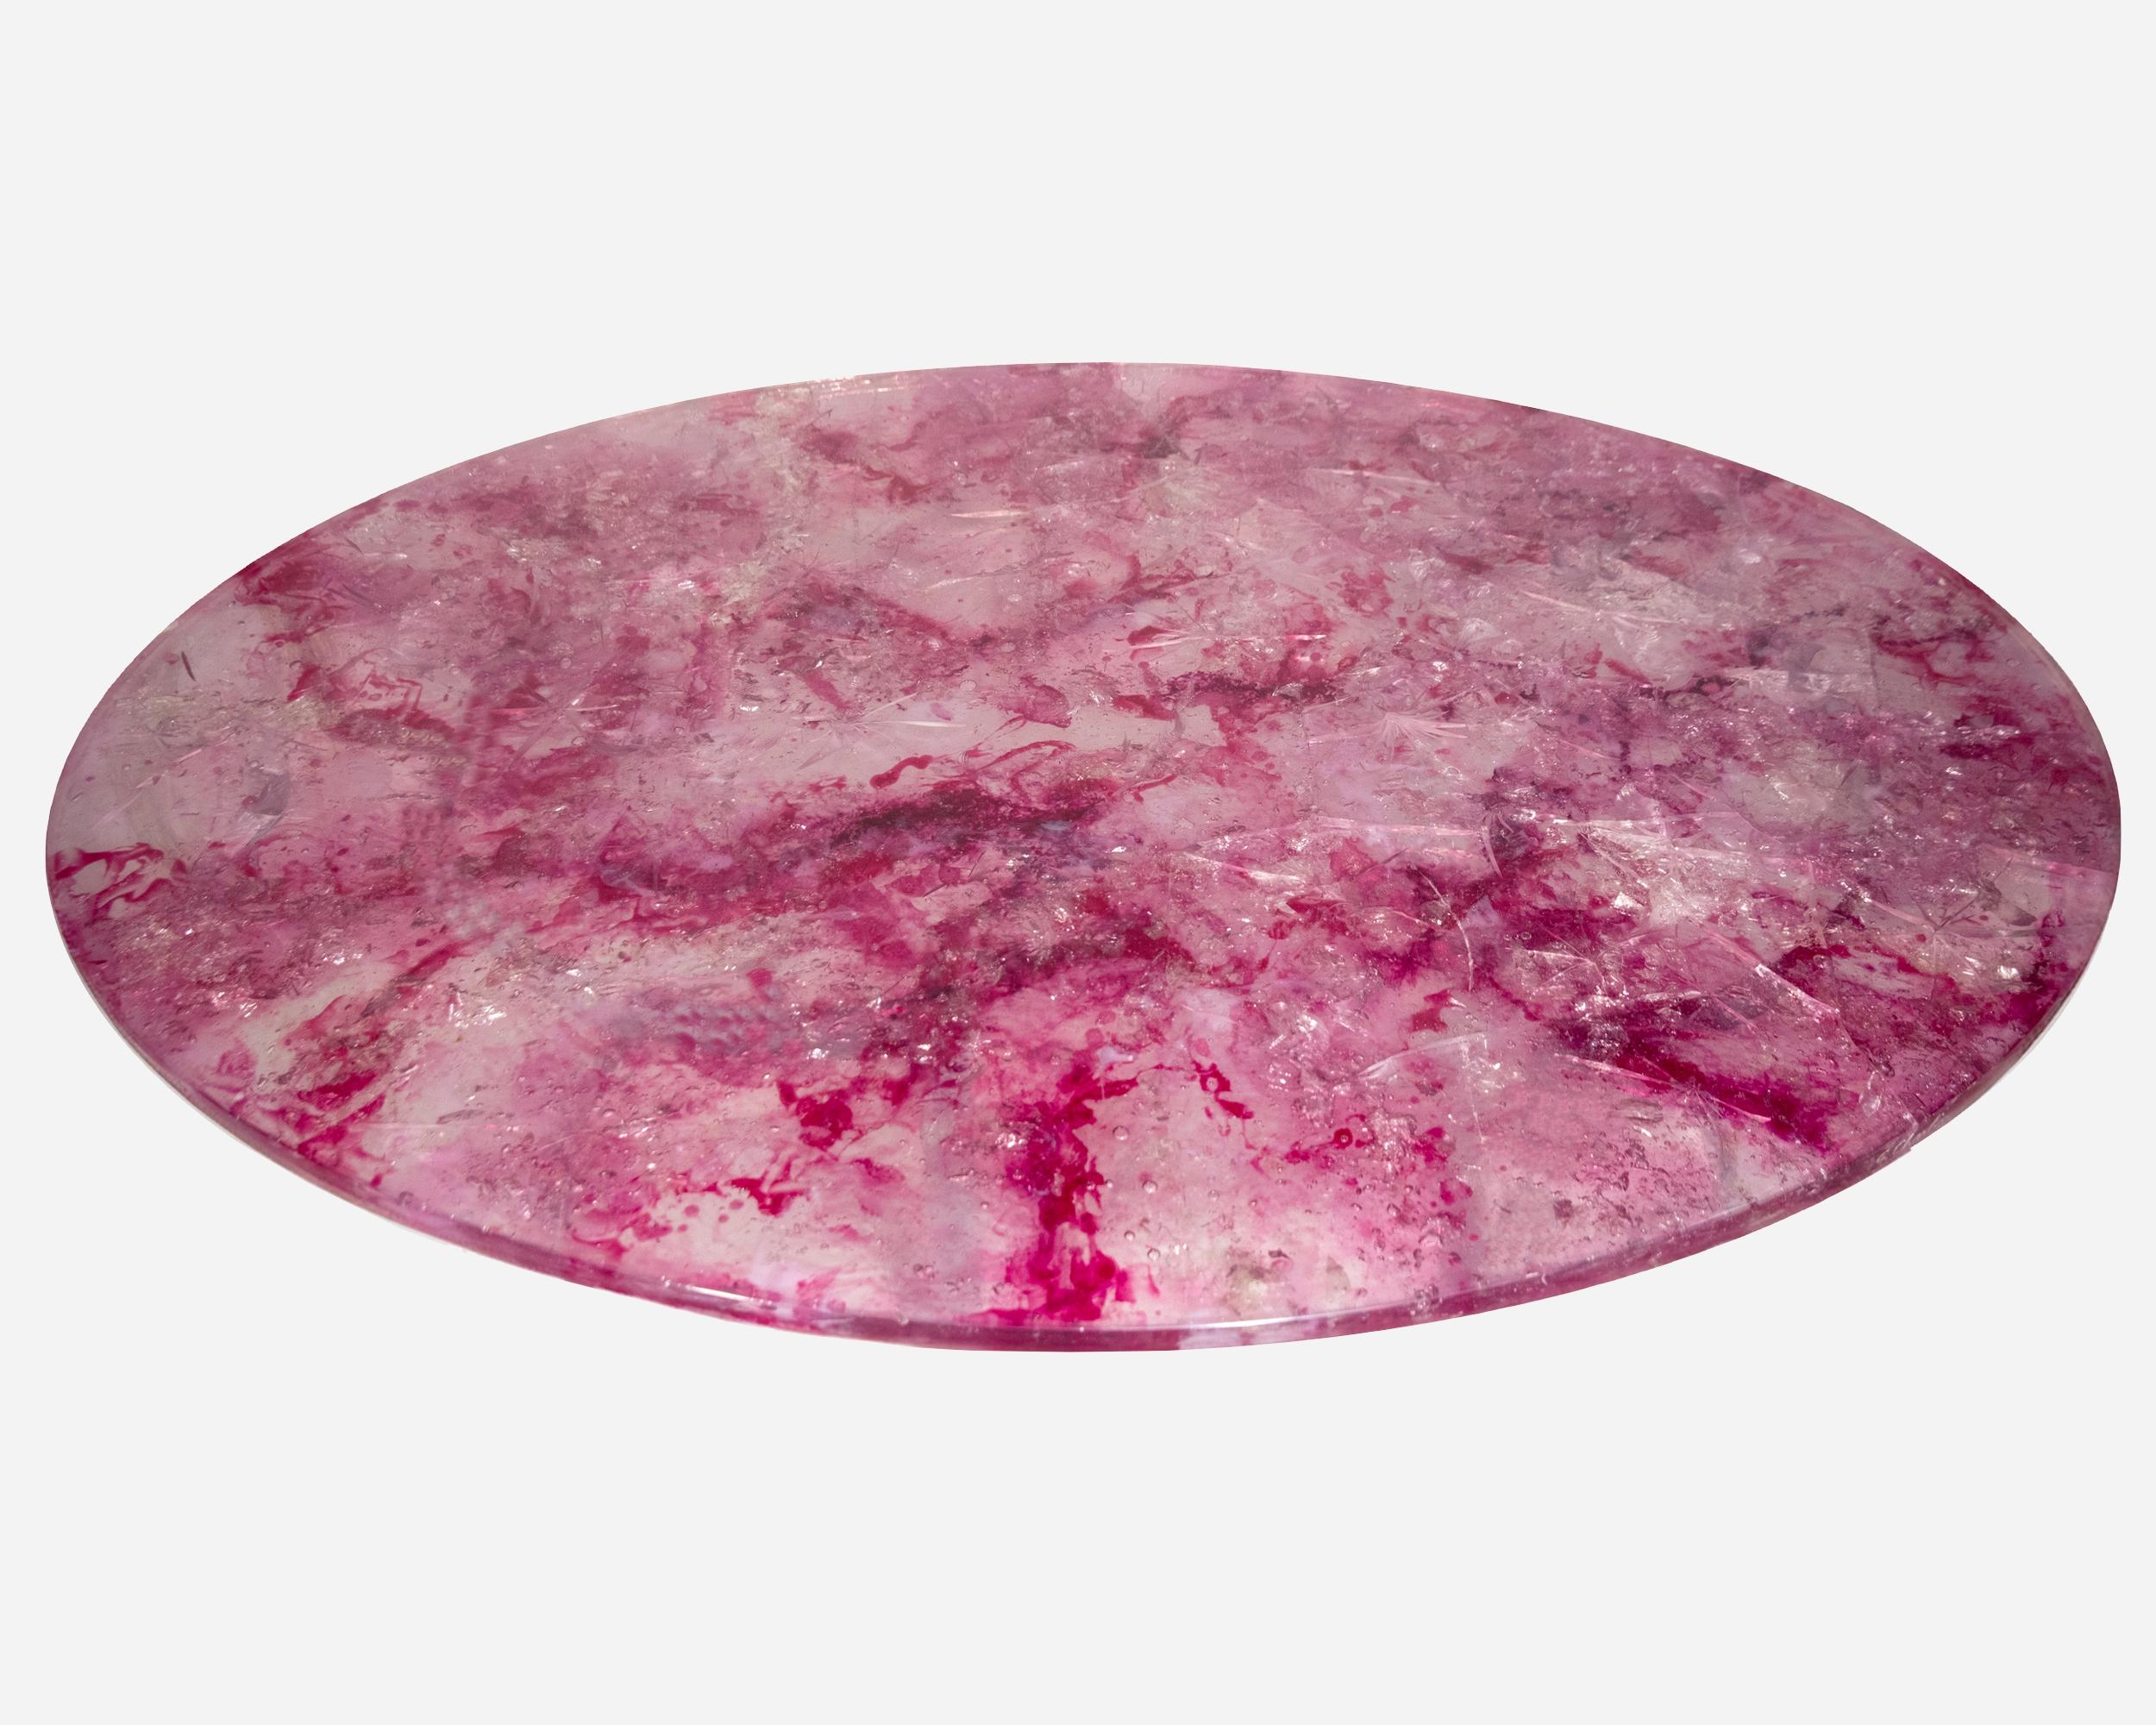 Large oval « Bourgogne » tabletop by Gilles Charbin, France, in resin with inclusions, set on two brushed steel bases designed by the artist.
Tray thickness 5.5 cm.
Unique piece. Signed.

Biography

Gilles Charbin (1939)

In the 1960s, after